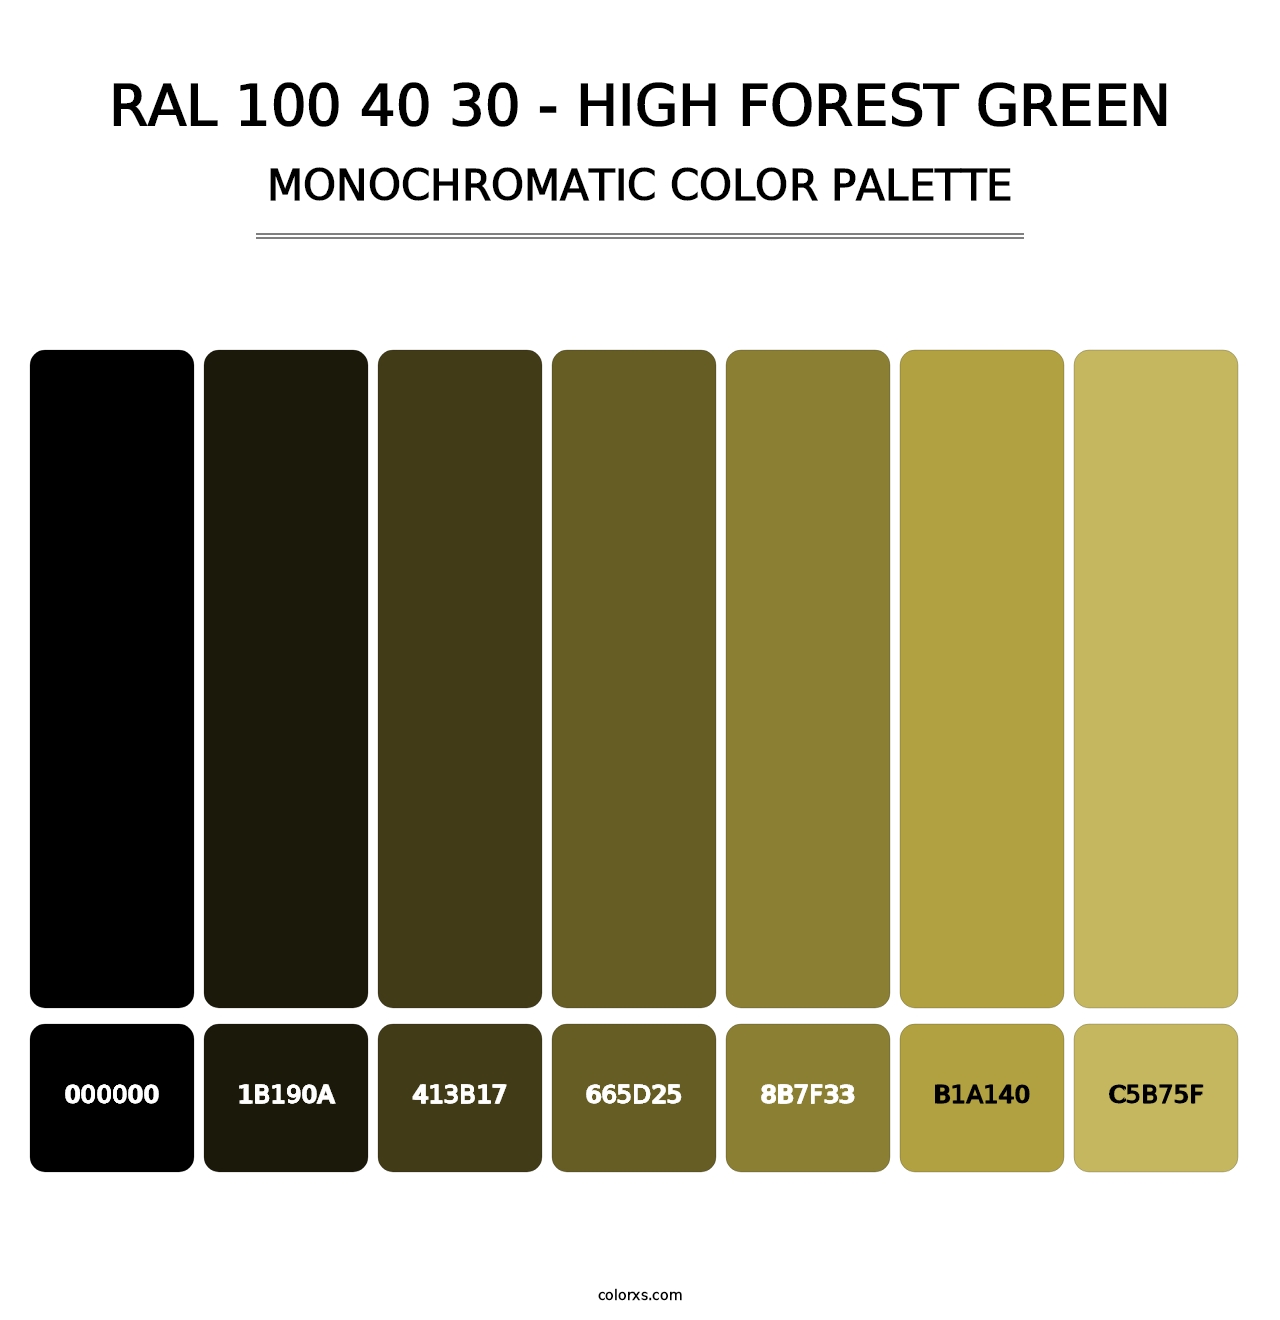 RAL 100 40 30 - High Forest Green - Monochromatic Color Palette